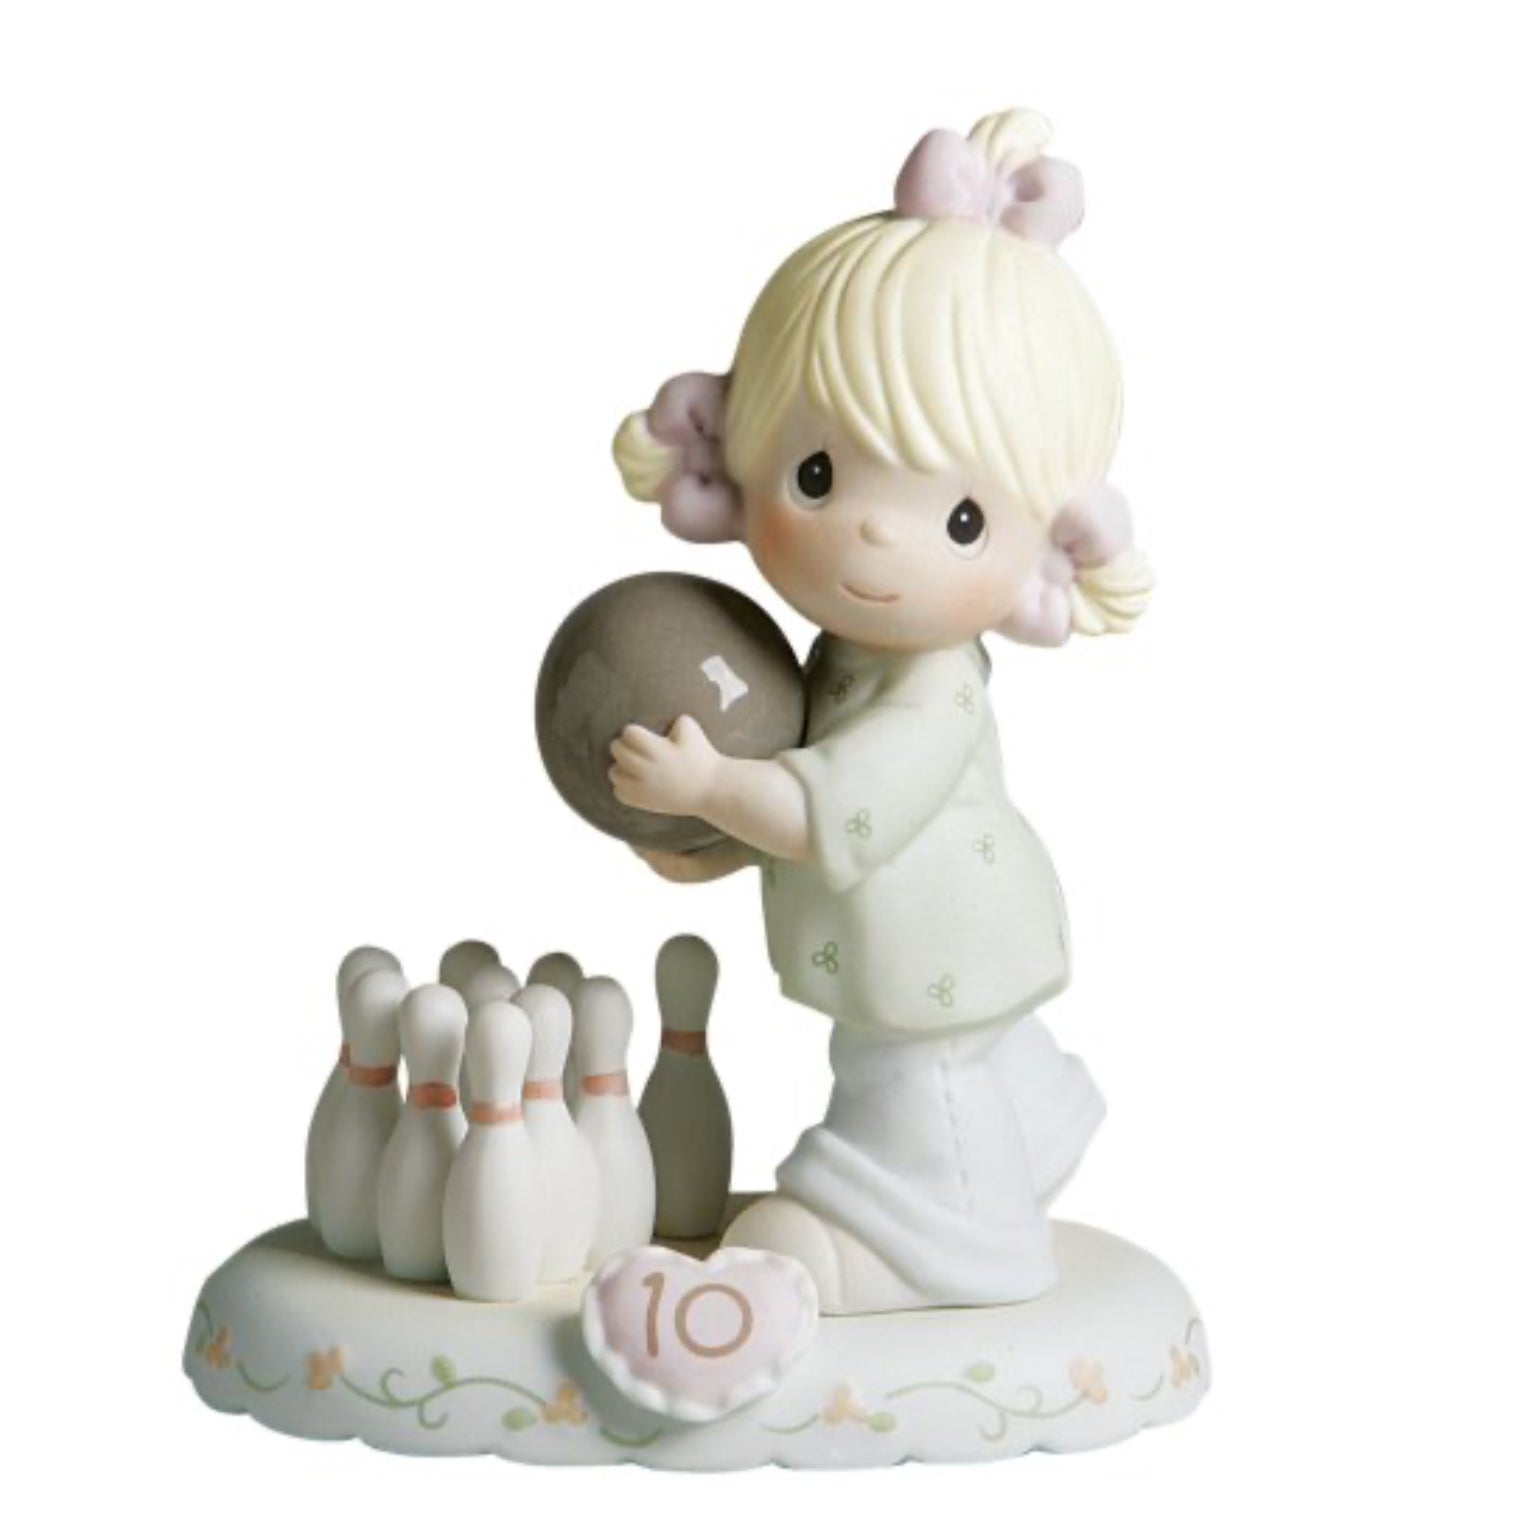 Growing in Grace Age 10 - Precious Moment Figurine